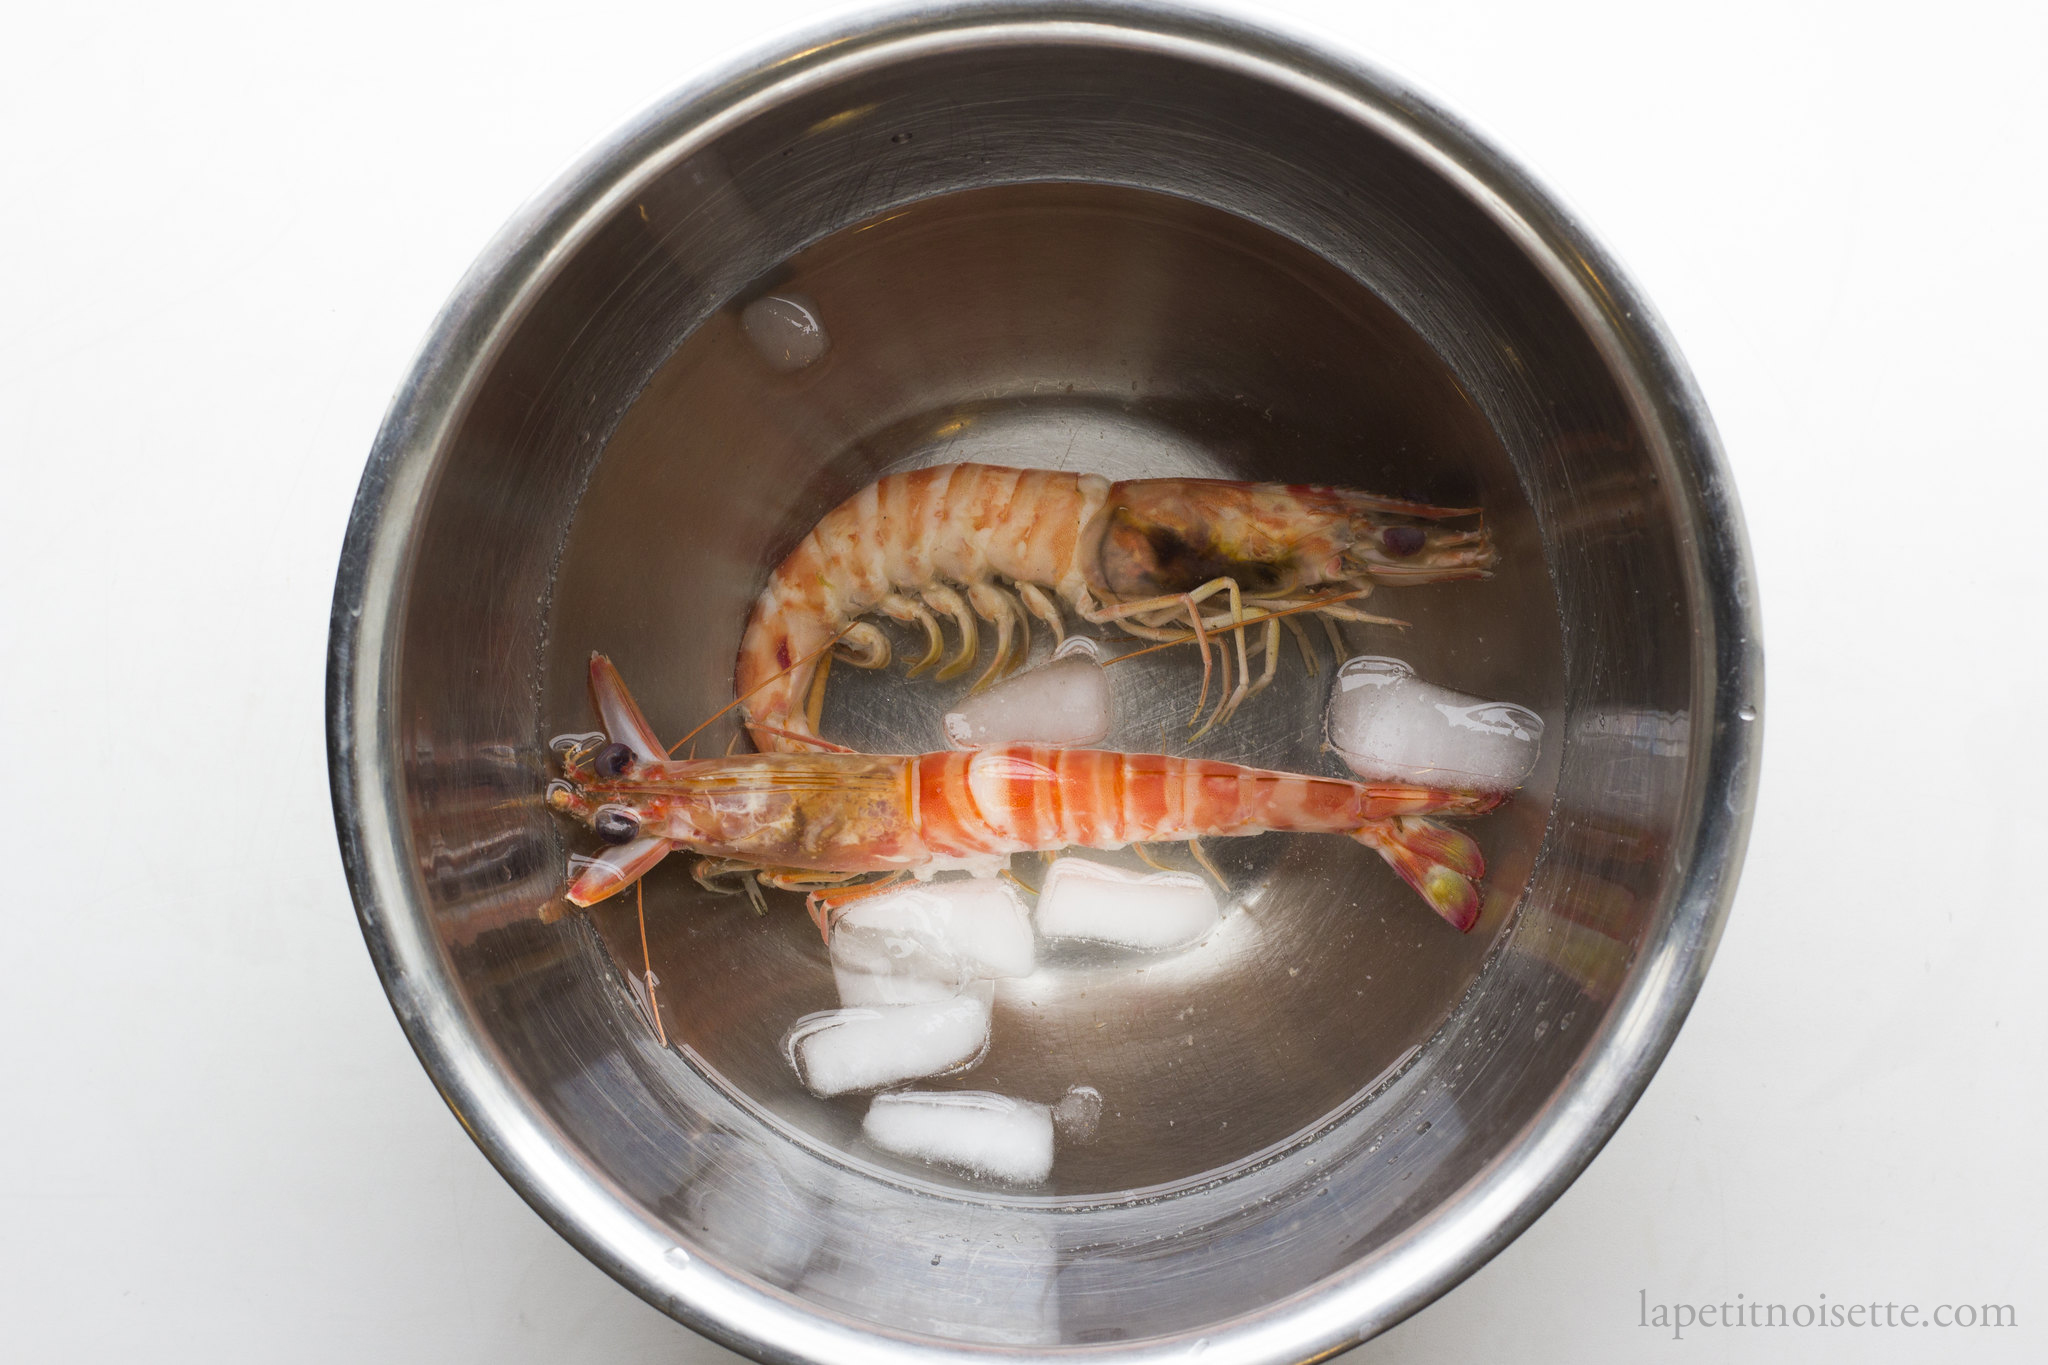 Shrimp cooling in a ice bath for sushi preperation.